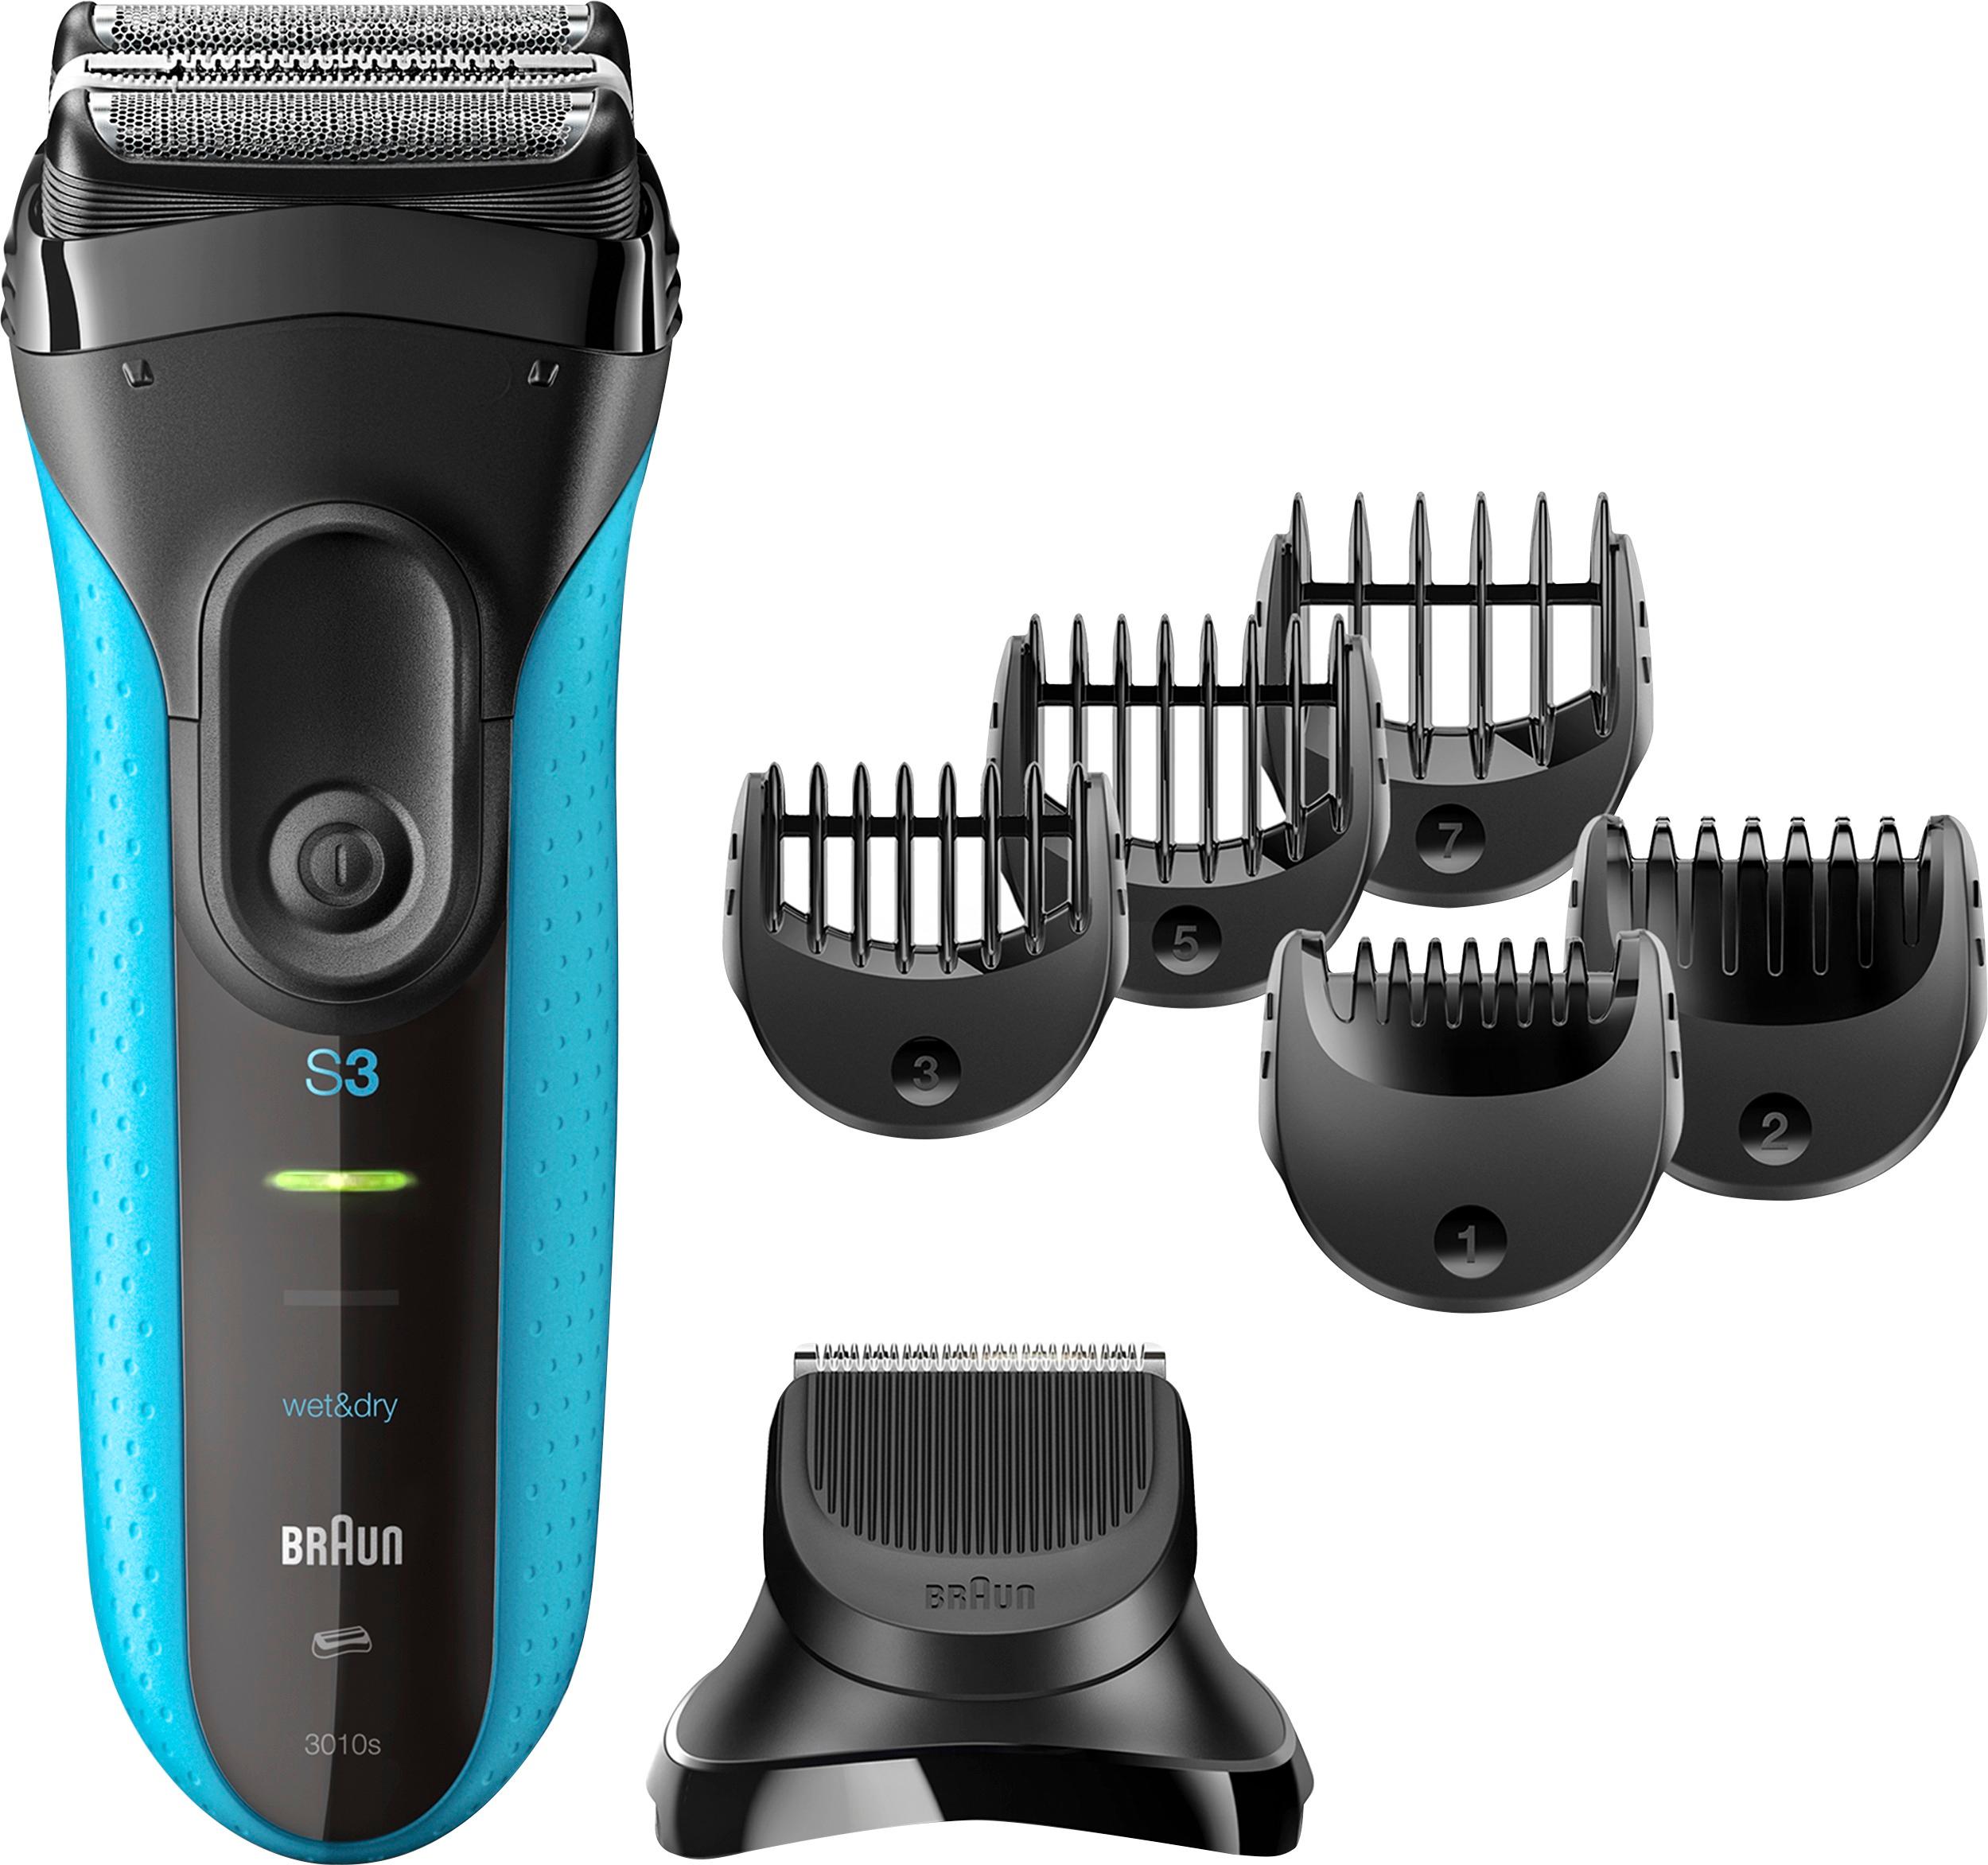 Best Buy: Braun Series 3 Shave&Style Wet/Dry Electric Shaver Blue 3010BT